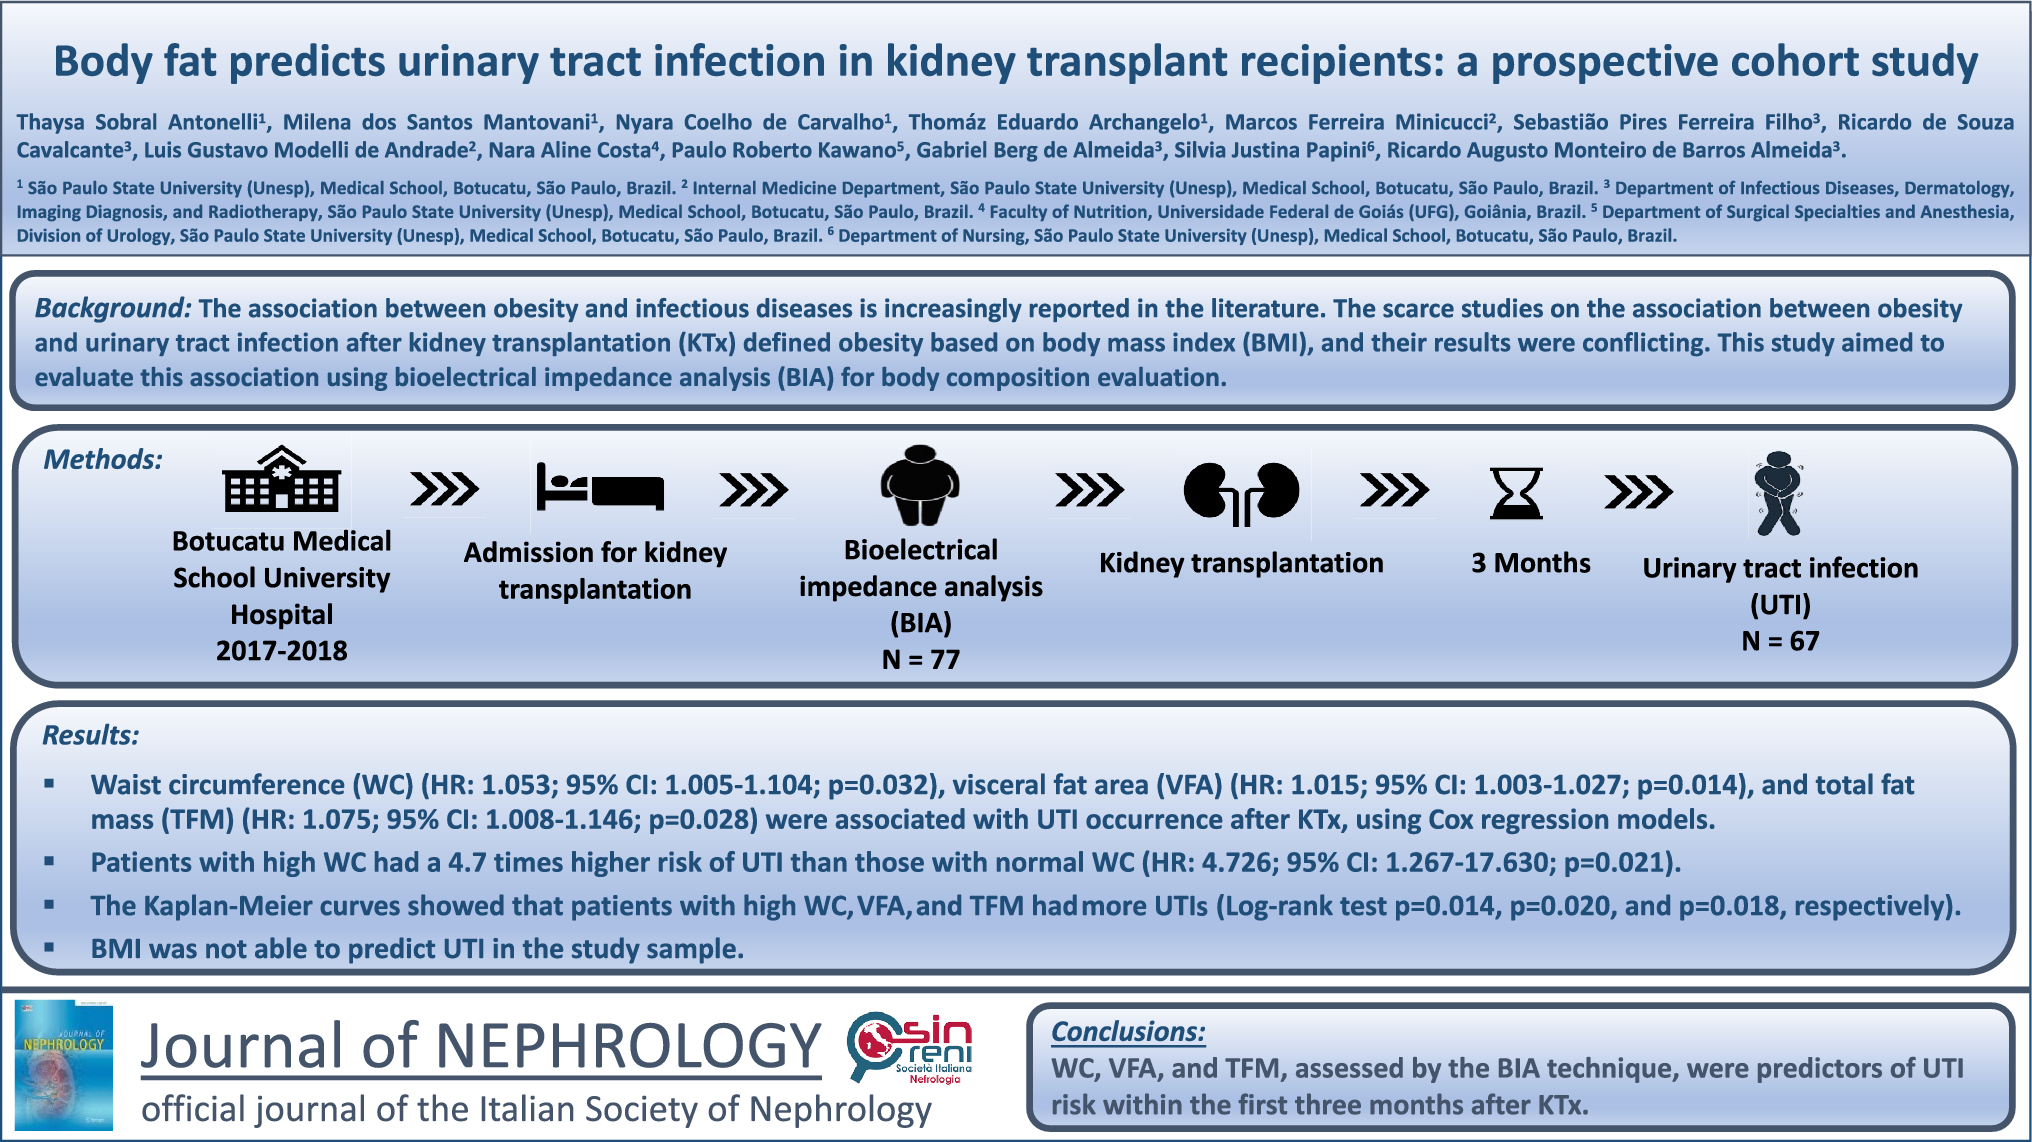 Body fat predicts urinary tract infection in kidney transplant recipients: a prospective cohort study